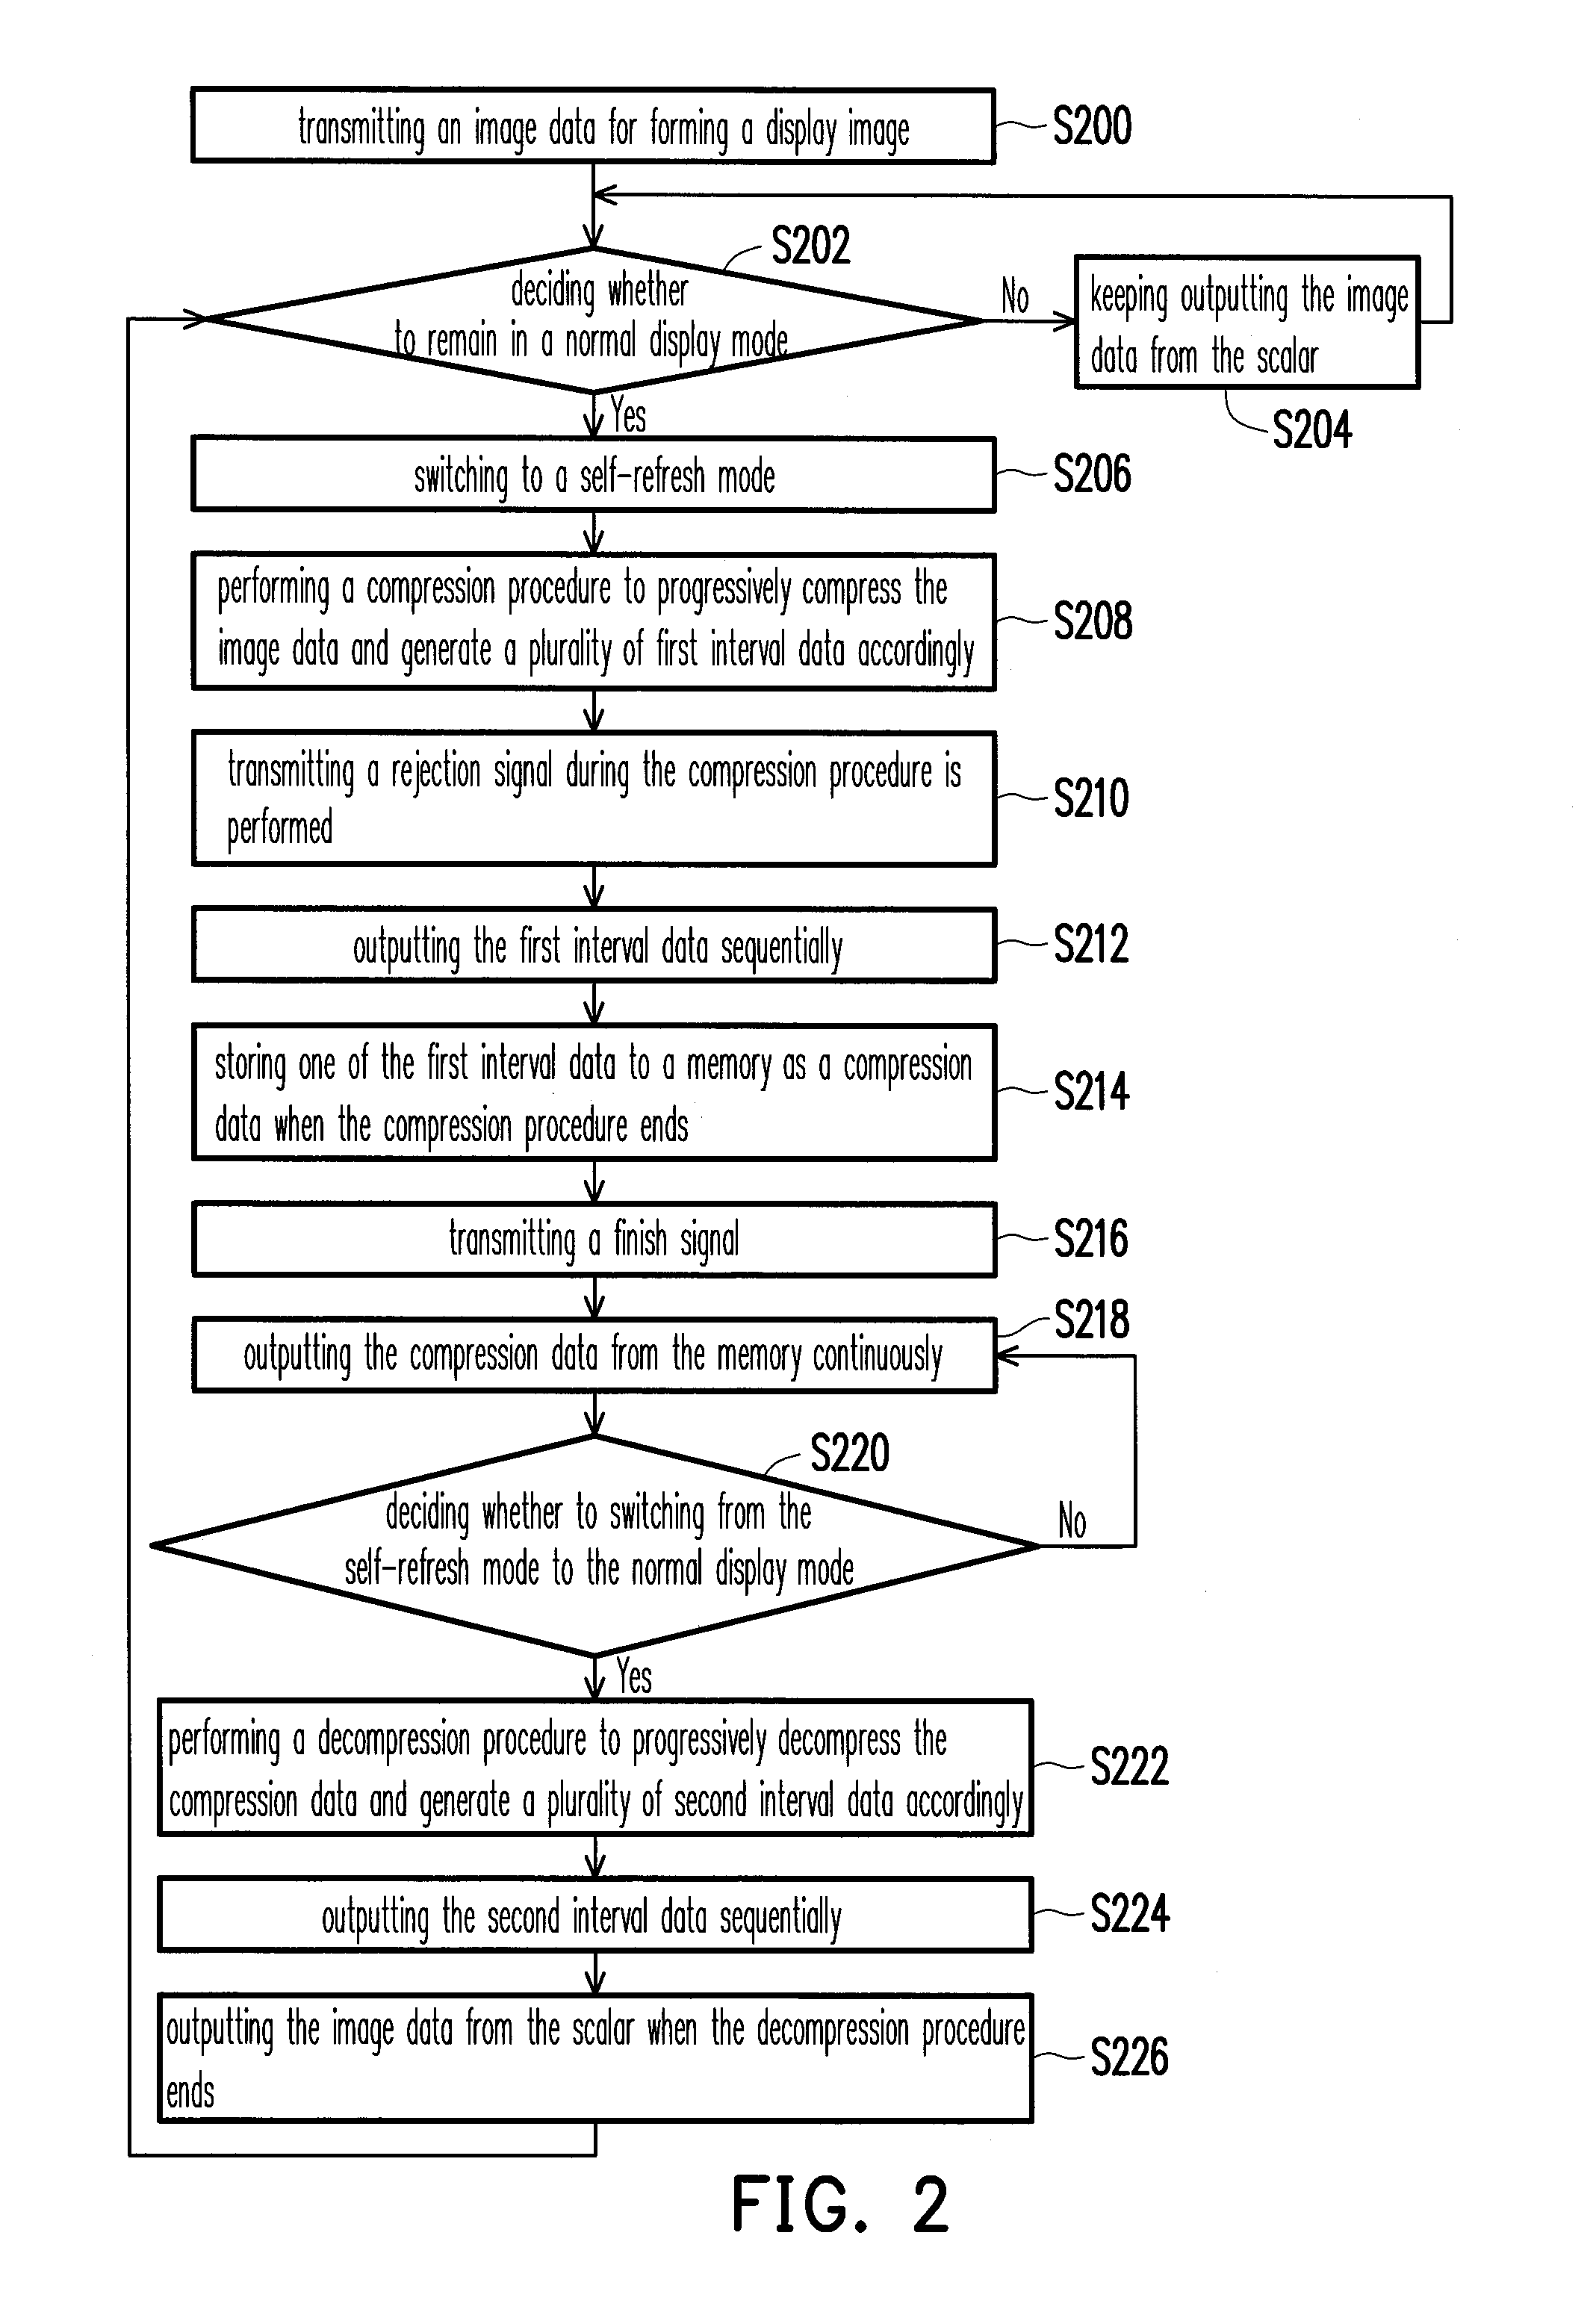 Panel control device and operation method thereof